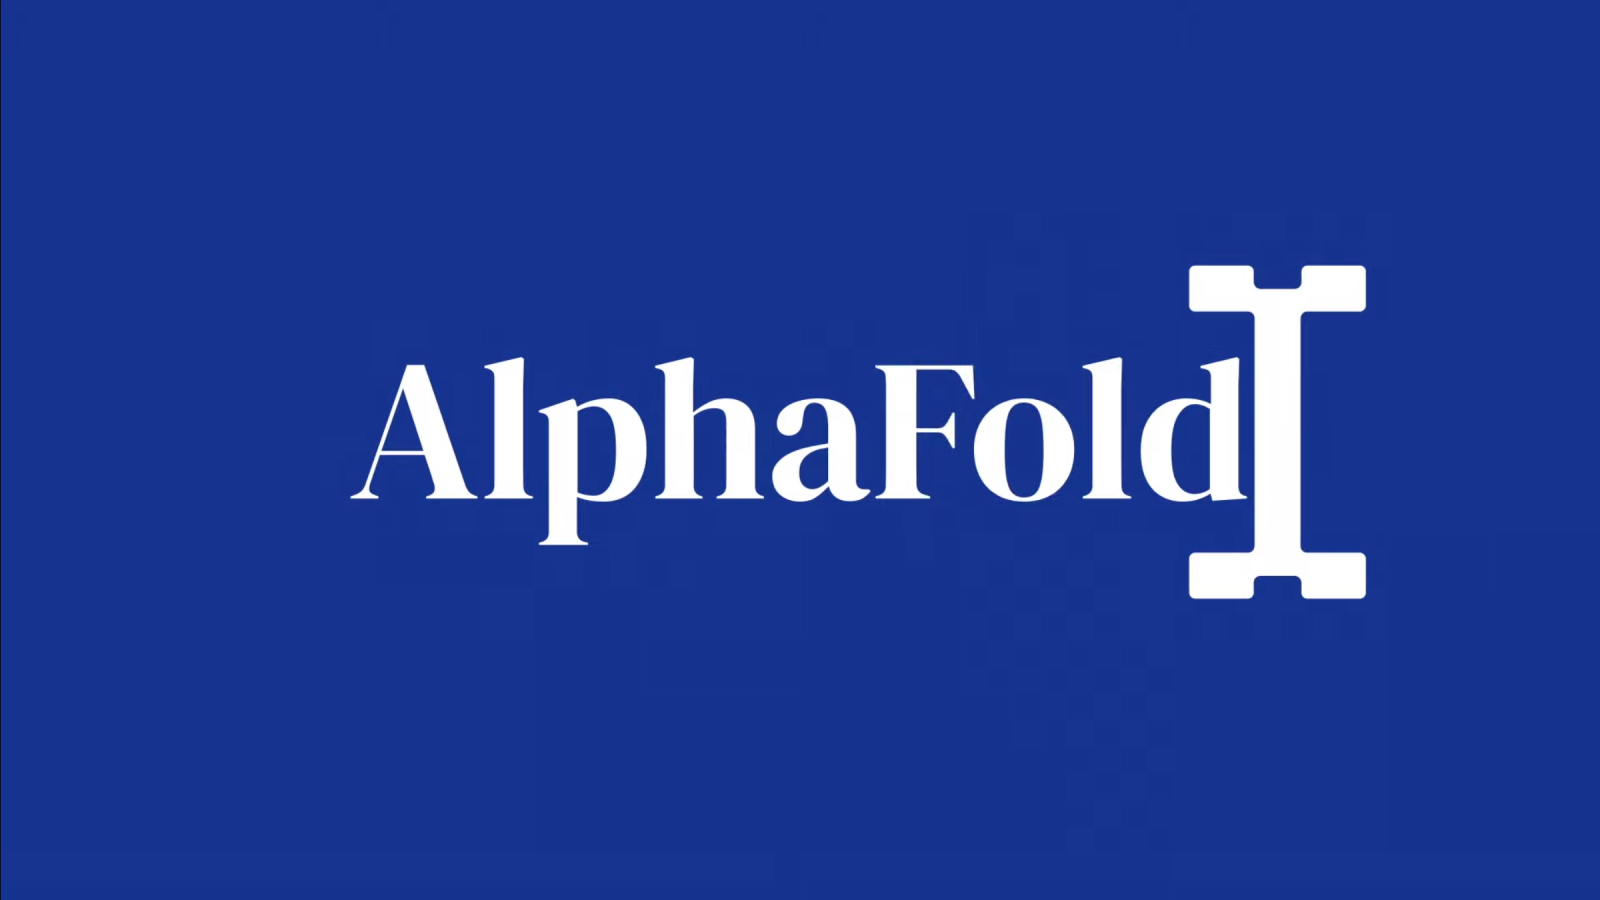 Alphabet’s DeepMind makes AI breakthrough with AlphaFold that could aid drug research